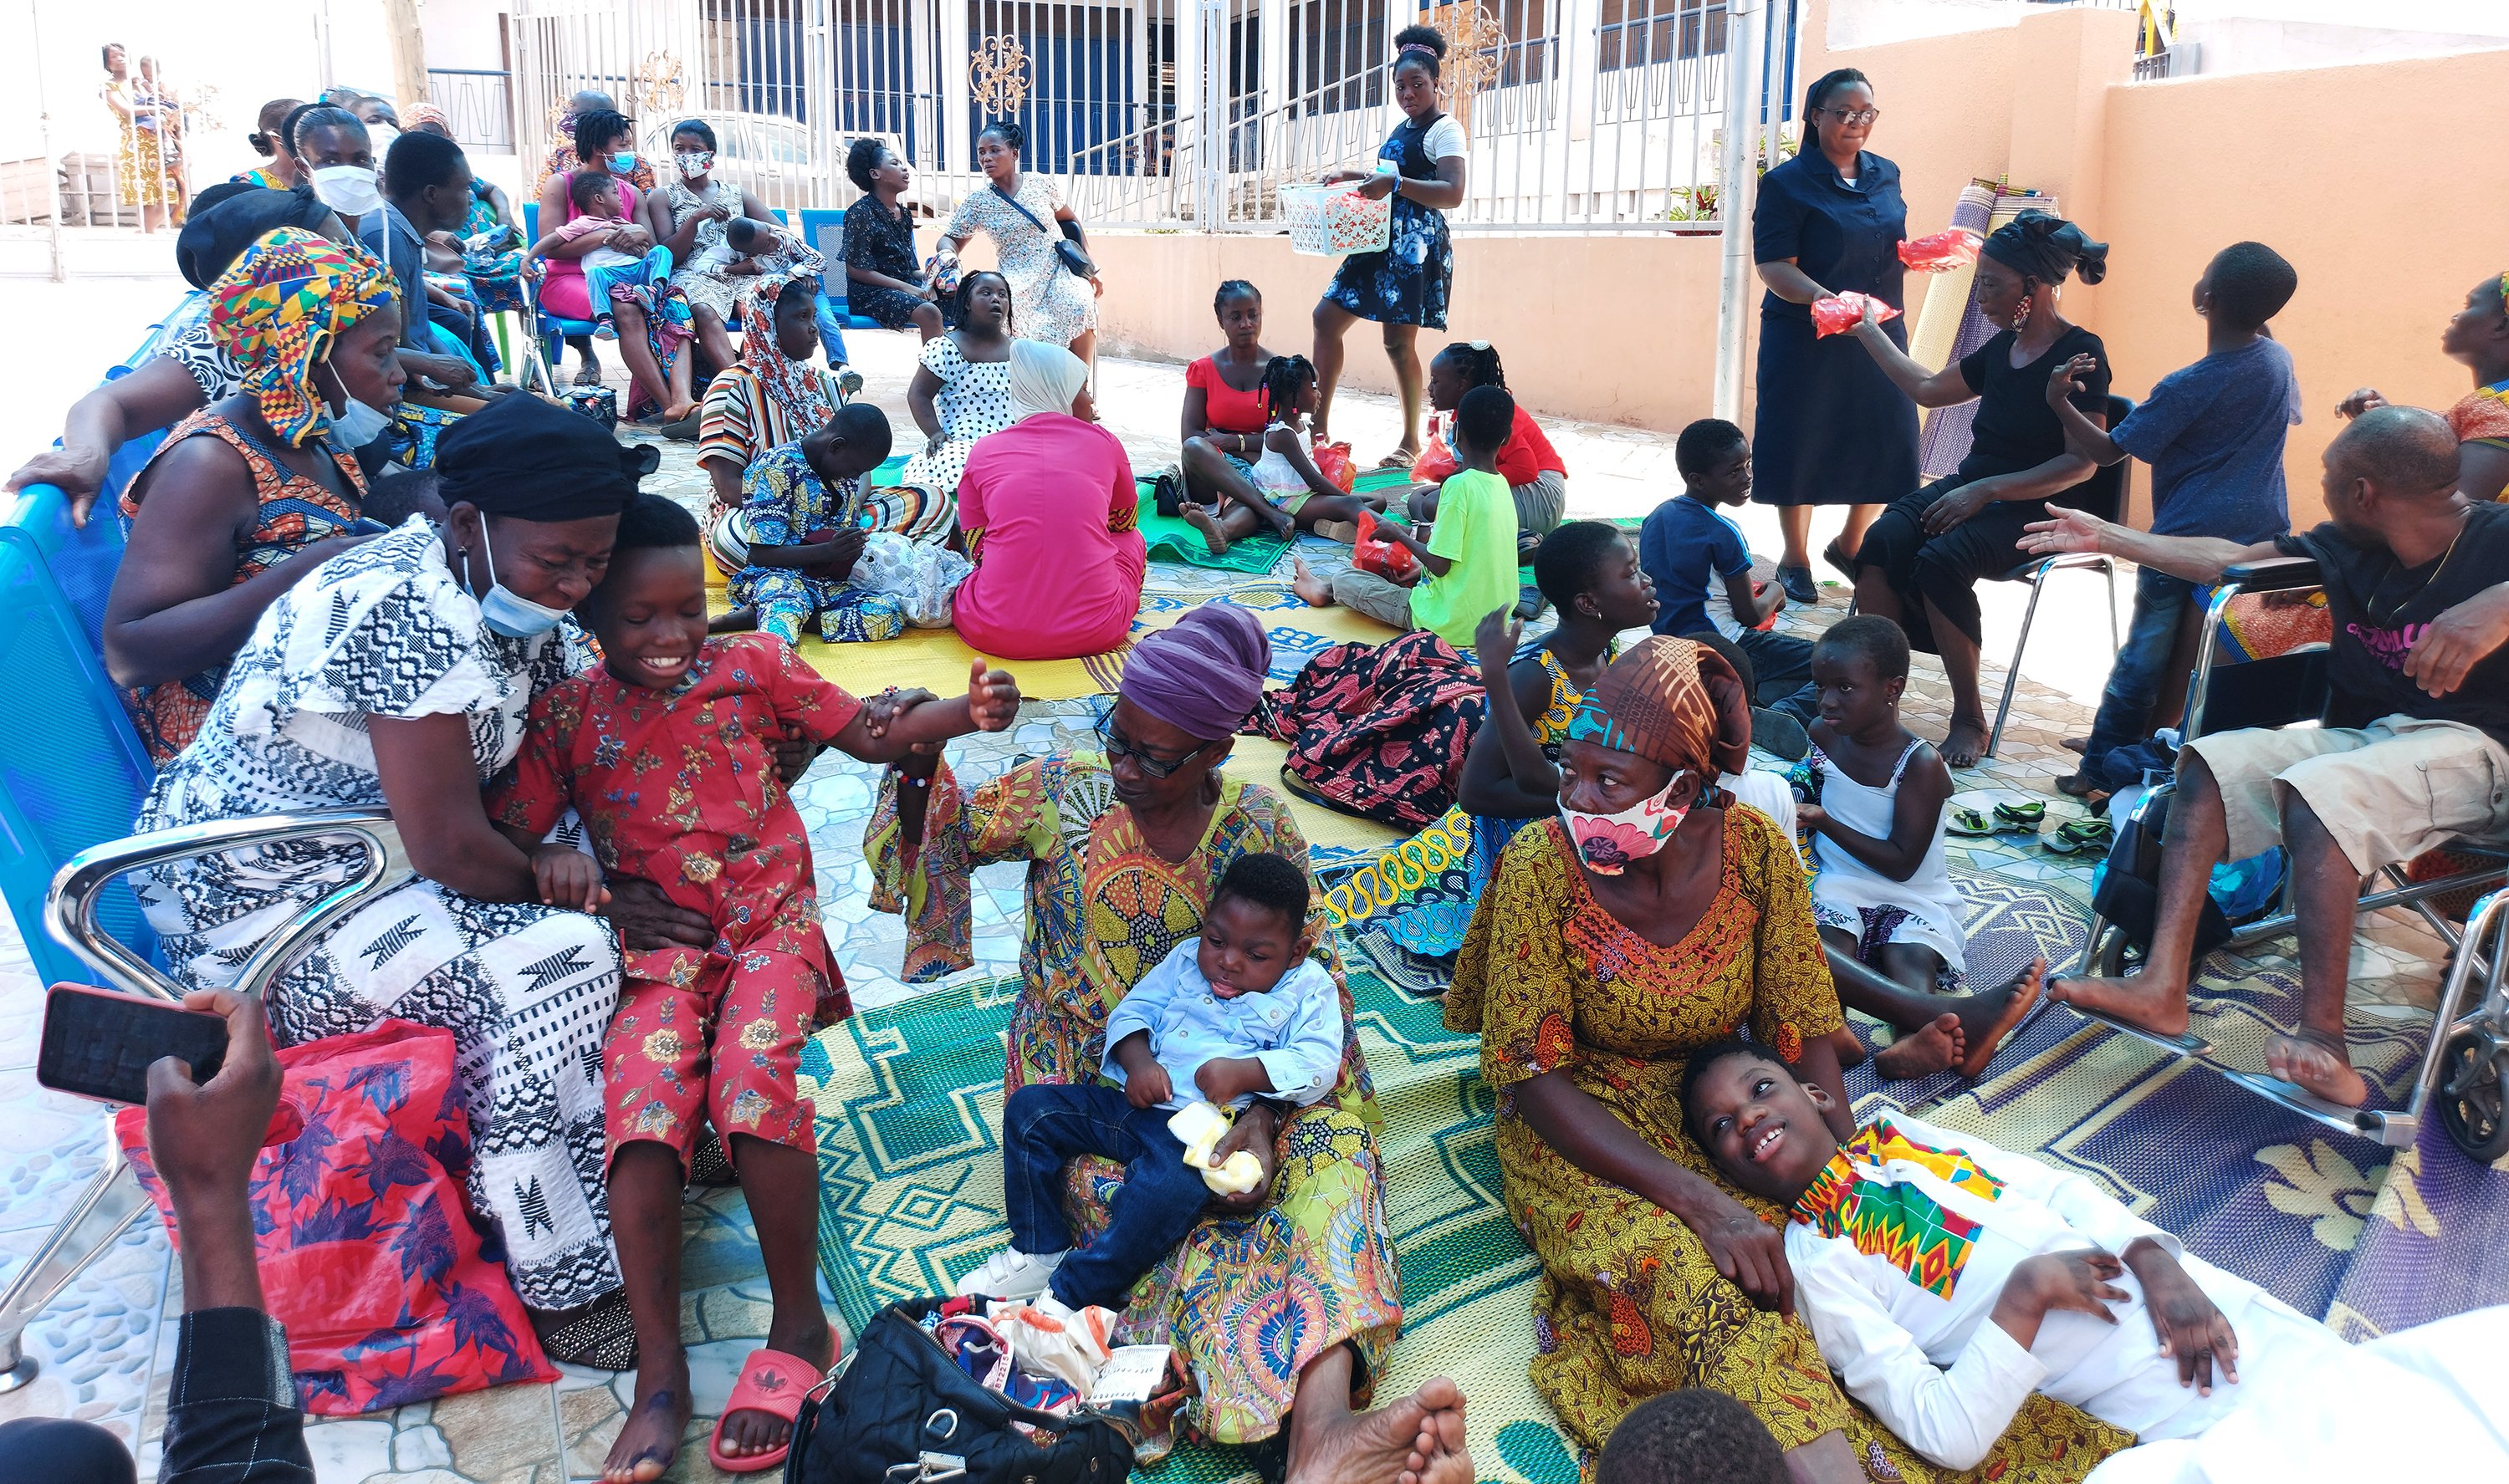 Sr. Olivia Umoh, a member of the Daughters of Charity of St. Vincent de Paul, speaks with parents and children with disabilities Oct. 13 in a Catholic-run facility courtyard next to St. Peter Cathedral in Kumasi, Ghana. (CNS/Courtesy of SCP)